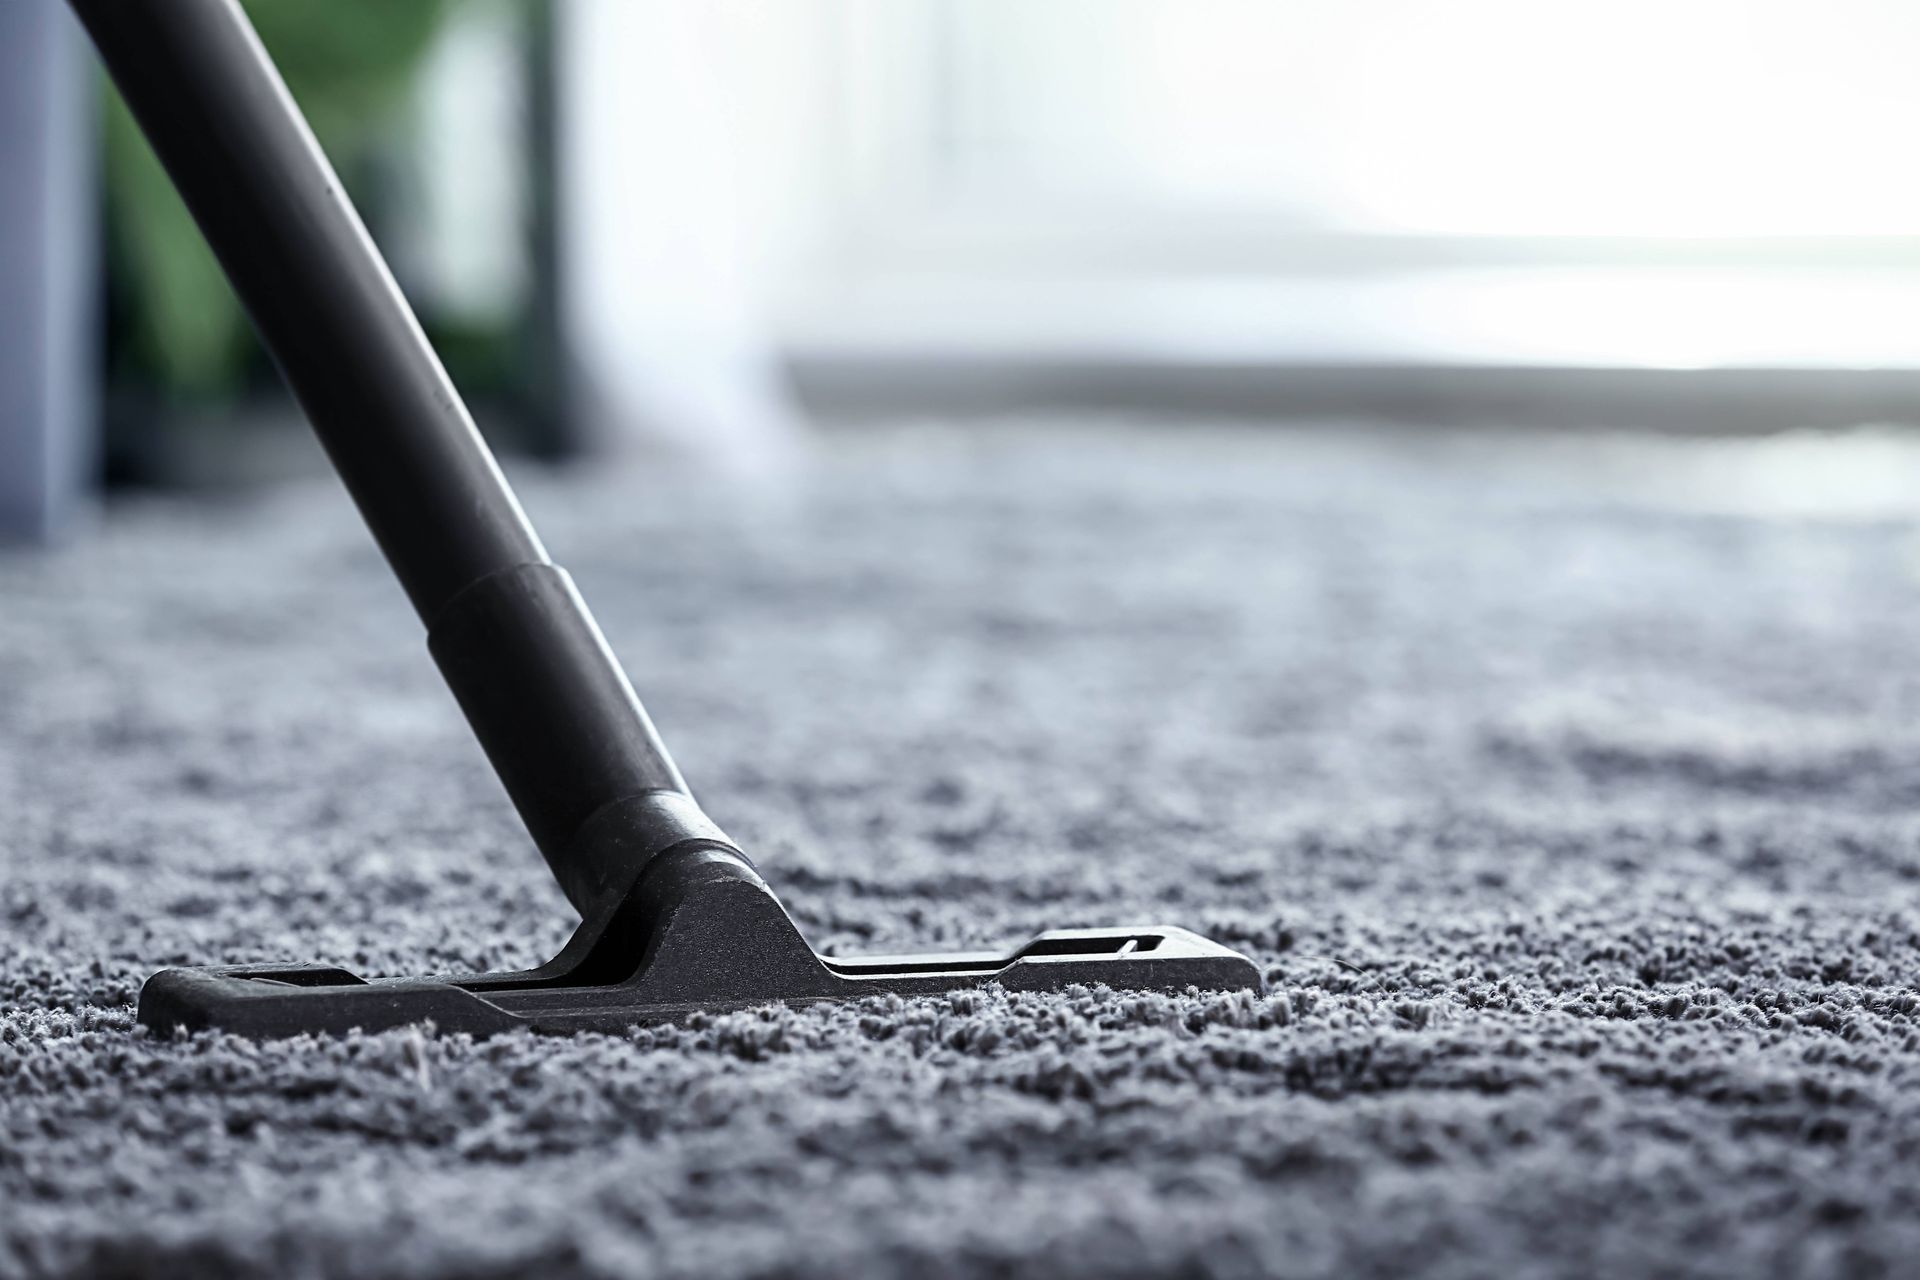 A vacuum cleaner is cleaning a carpet in a living room.